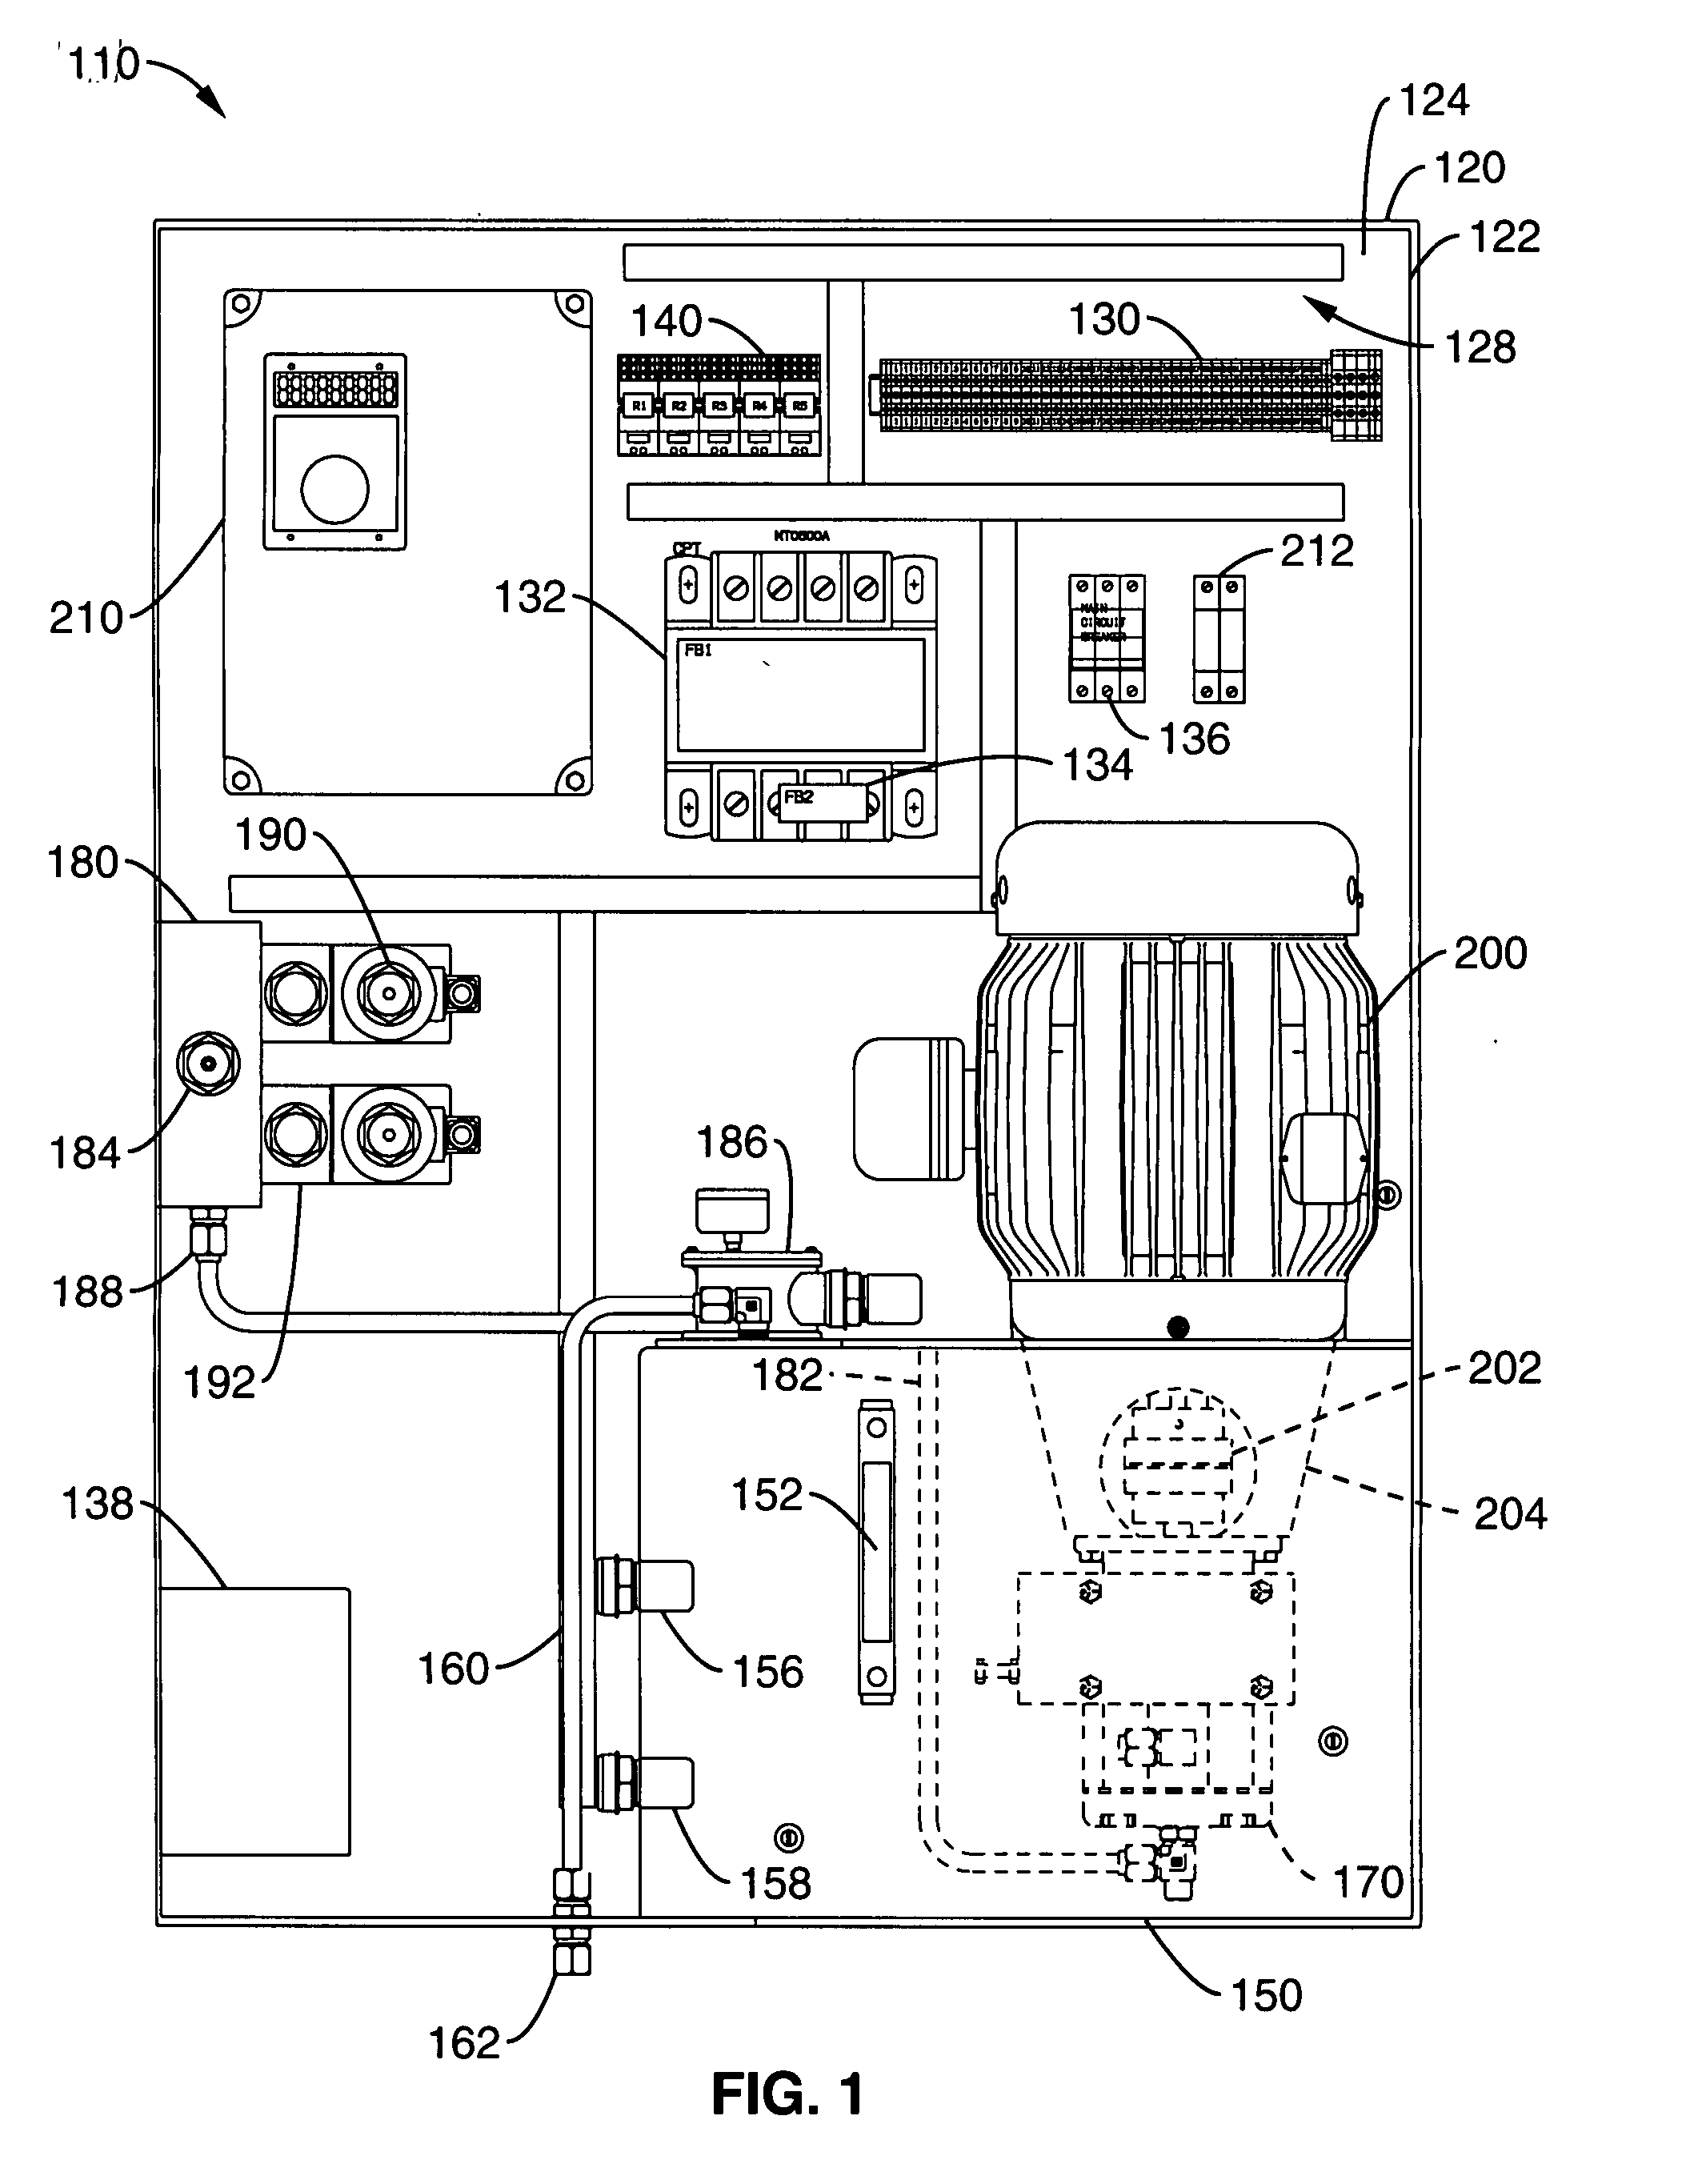 Actuator control system and method